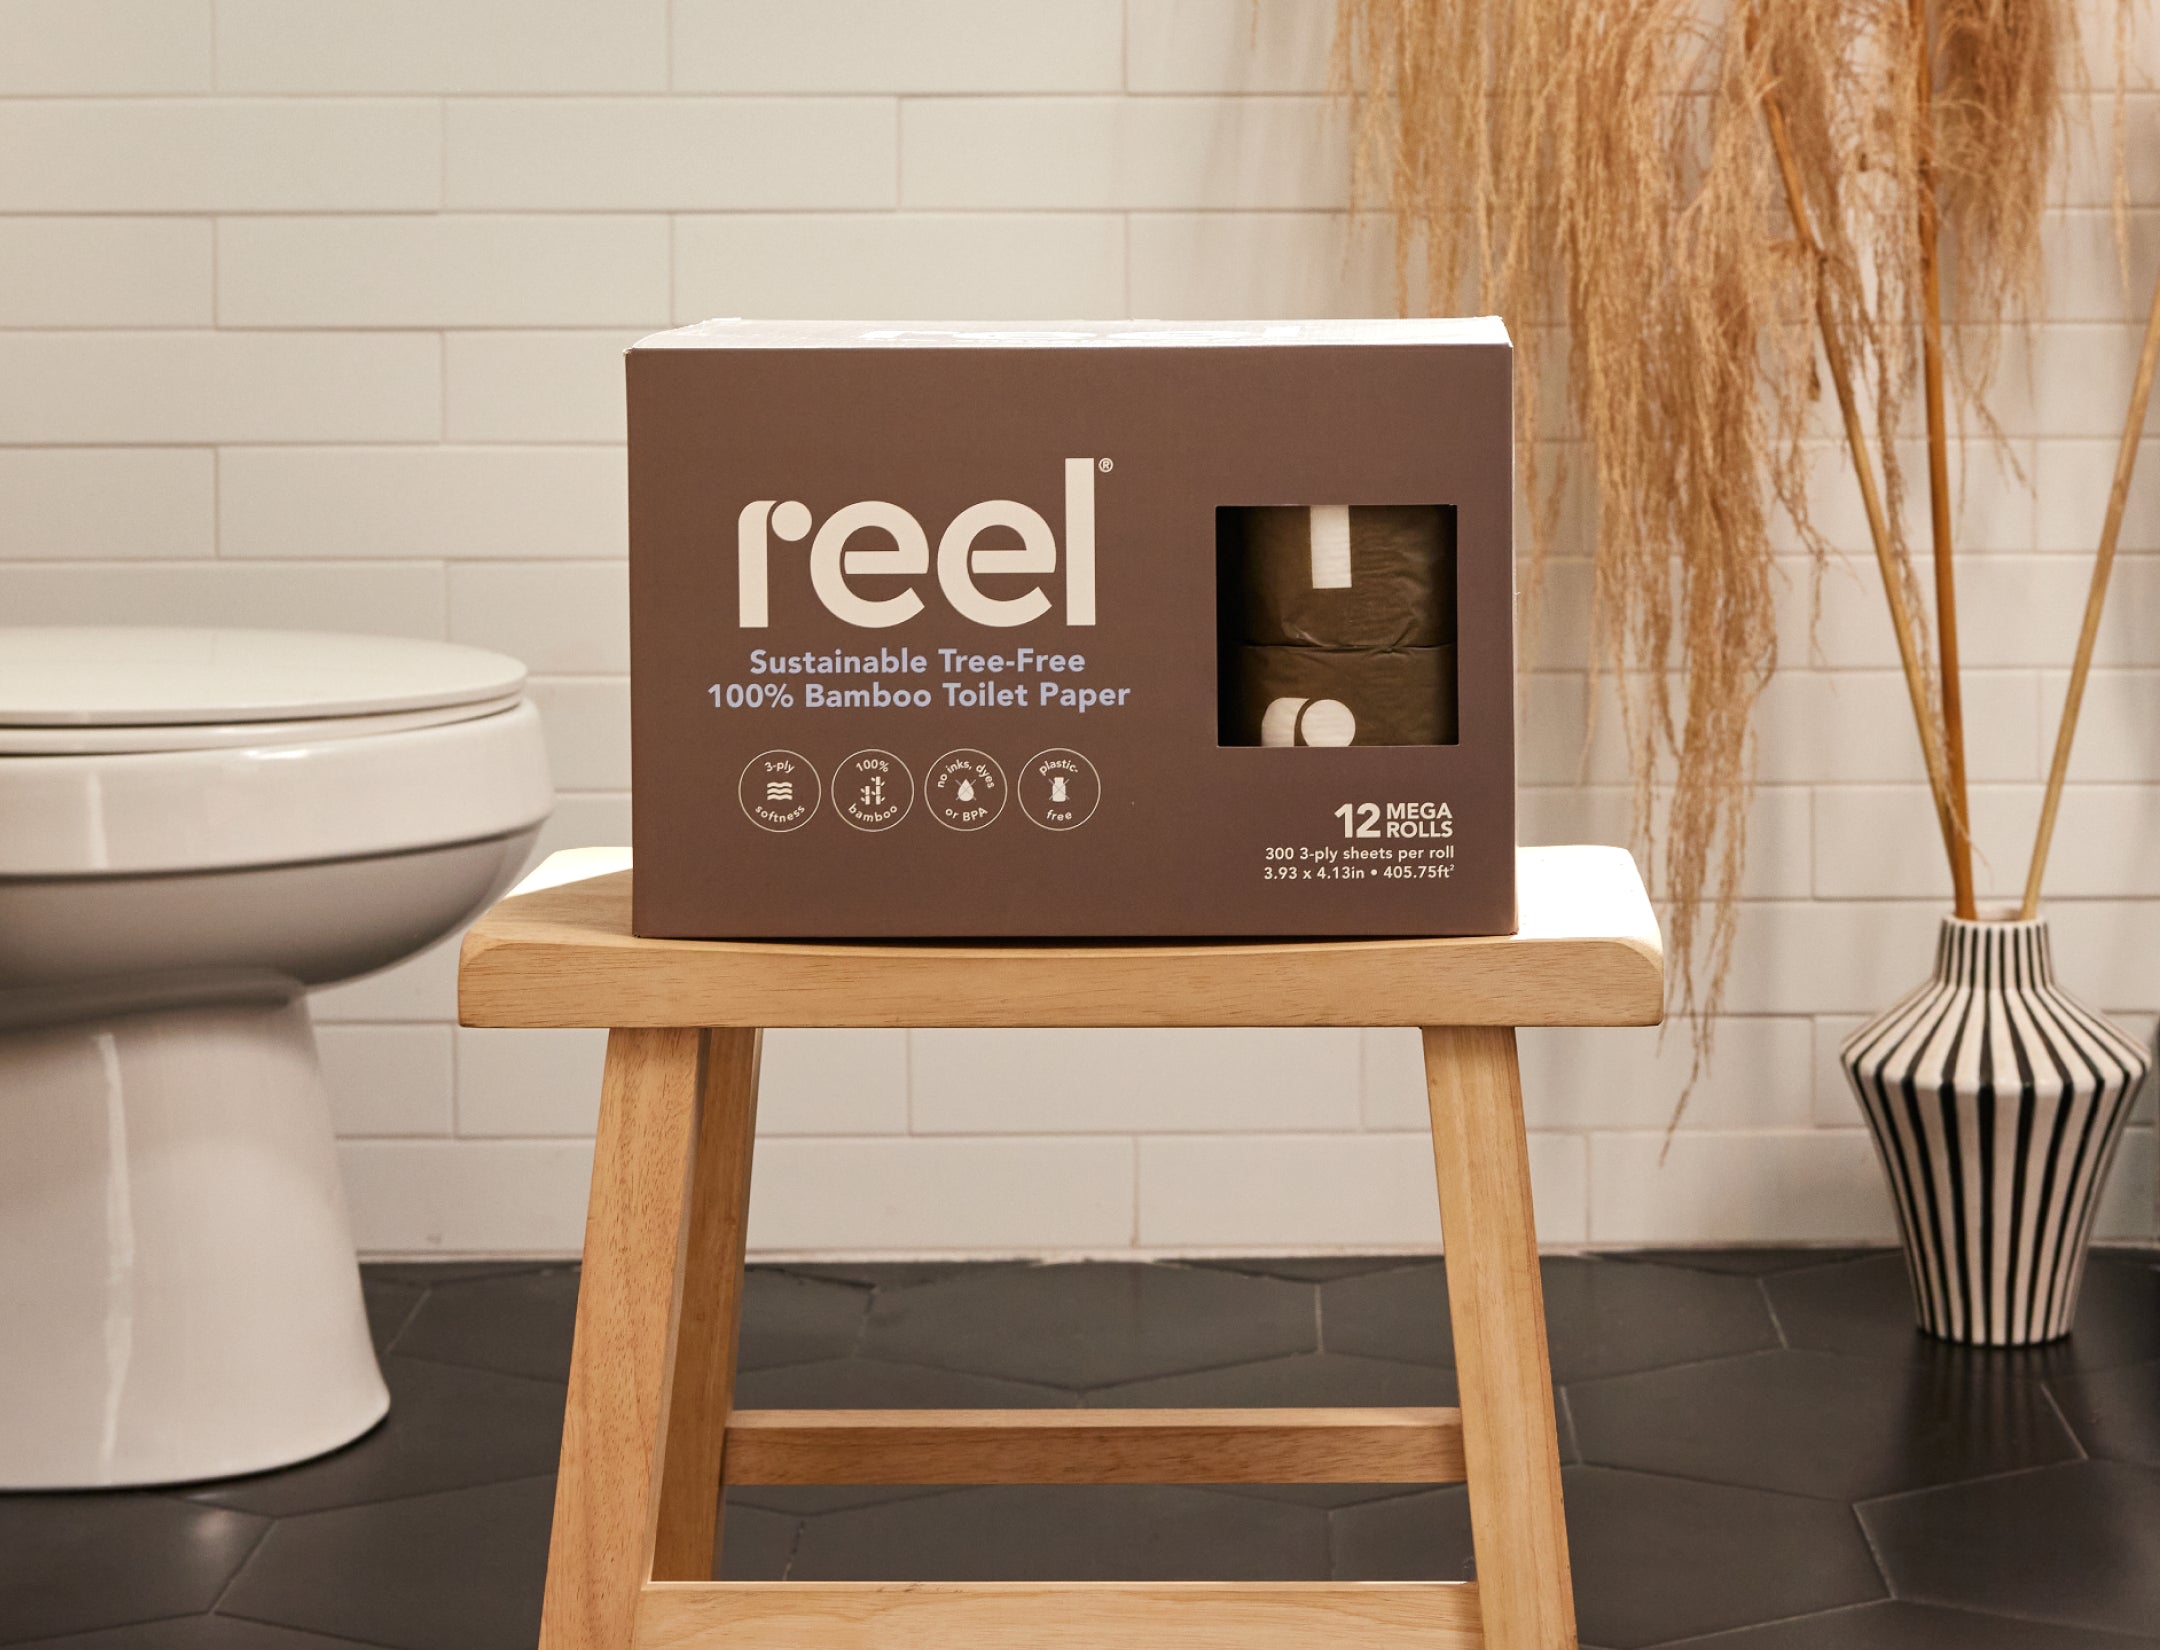 A box of Reel toilet paper sitting on a stool in a bathroom